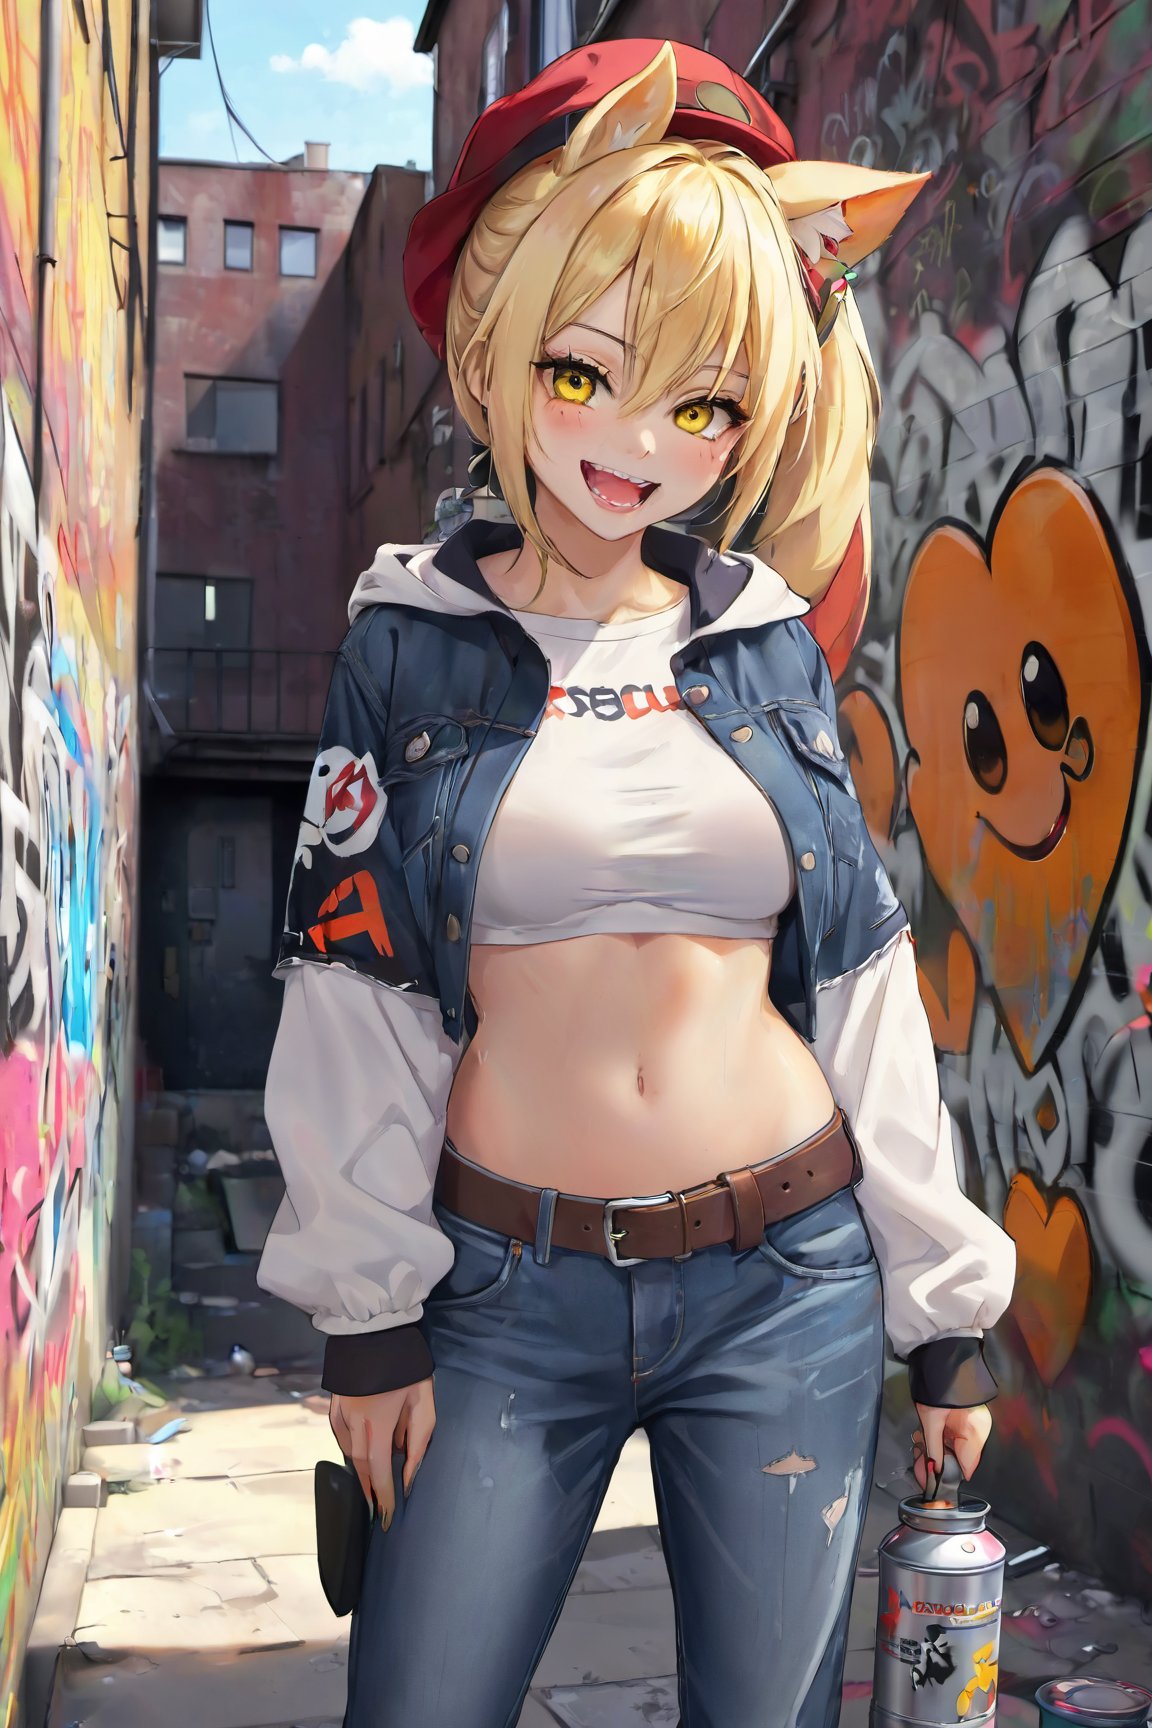 Original Character, Volumetric Lighting, Best Shadows, Shallow Depth of Field, Portrait Of Stunningly Beautiful Girl, Petite, Delicate Beautiful Attractive Face With Alluring Yellow Eyes, Messy Painted Face, Sharp Eyebrows, Broadly Smiling, Open Mouth, Fangs Out, Lovely Medium Breasts, Layered Long Twintail Blond Hair, Blush Eyeshadow, Thick Eyelashes, Applejack Hat, Oversized Pop Jacket, Mini Underboob Tee, Open Navel, Slim Waist, Denim Jeans Pants, With Buckle Belt, In The Graffiti Alley, Waste Container, Outside Stairs, Outdoor Unit, Holding Spray Paint Can, Standing, (Highest Quality, Amazing Details:1.25), (Solo:1.3), real anime 